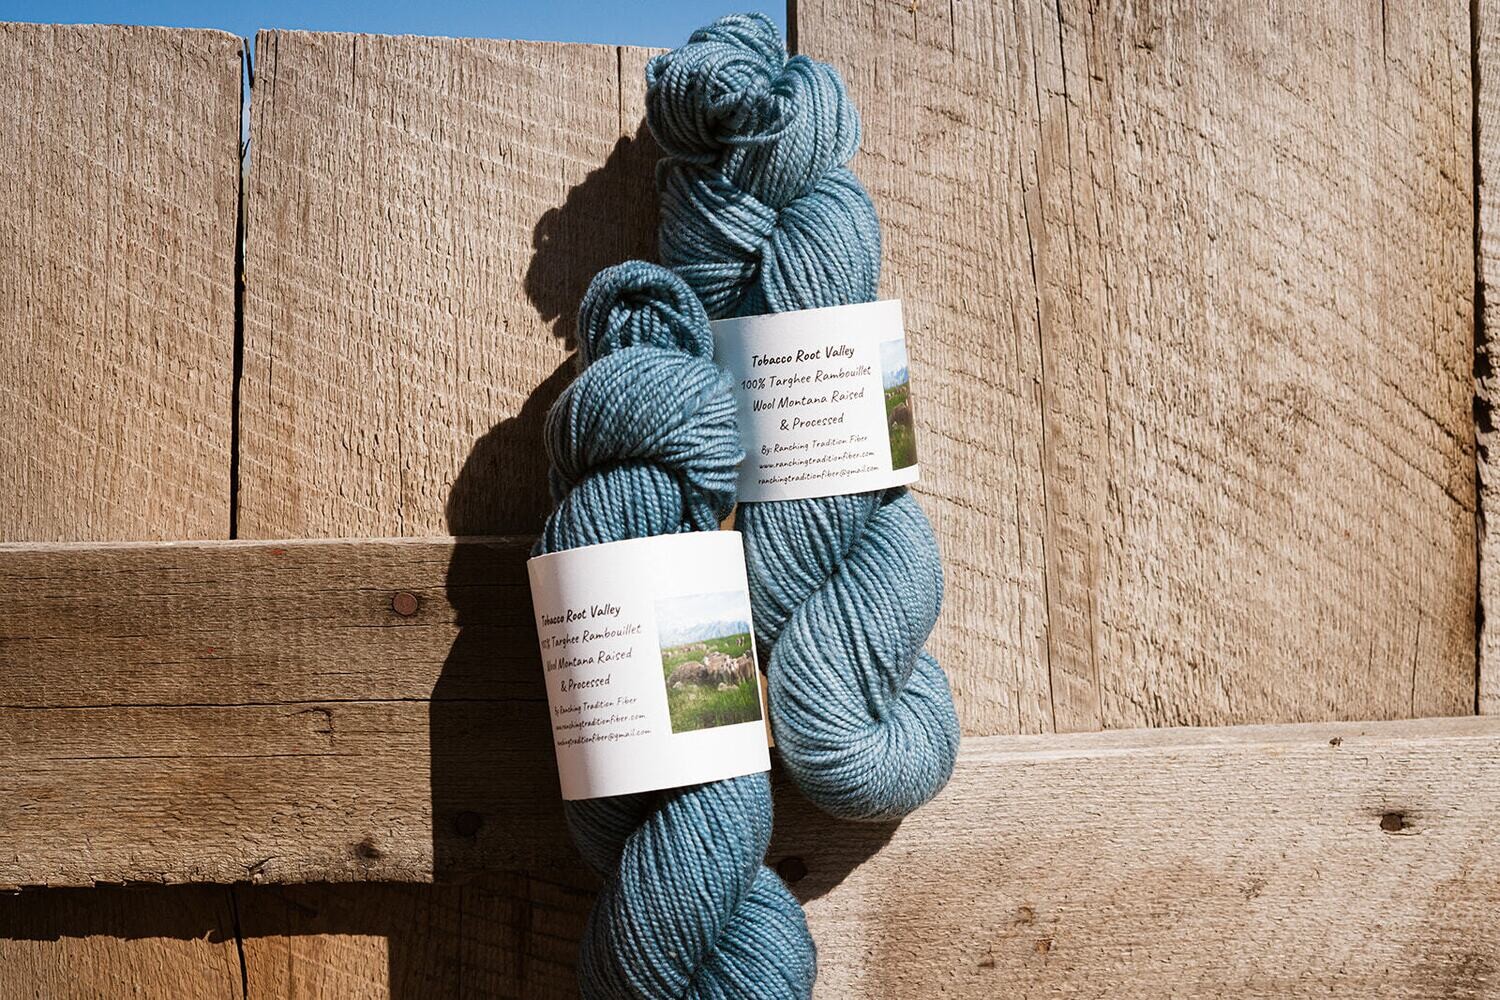 Homegrown Tobacco Root Valley Yarn ~ Madison